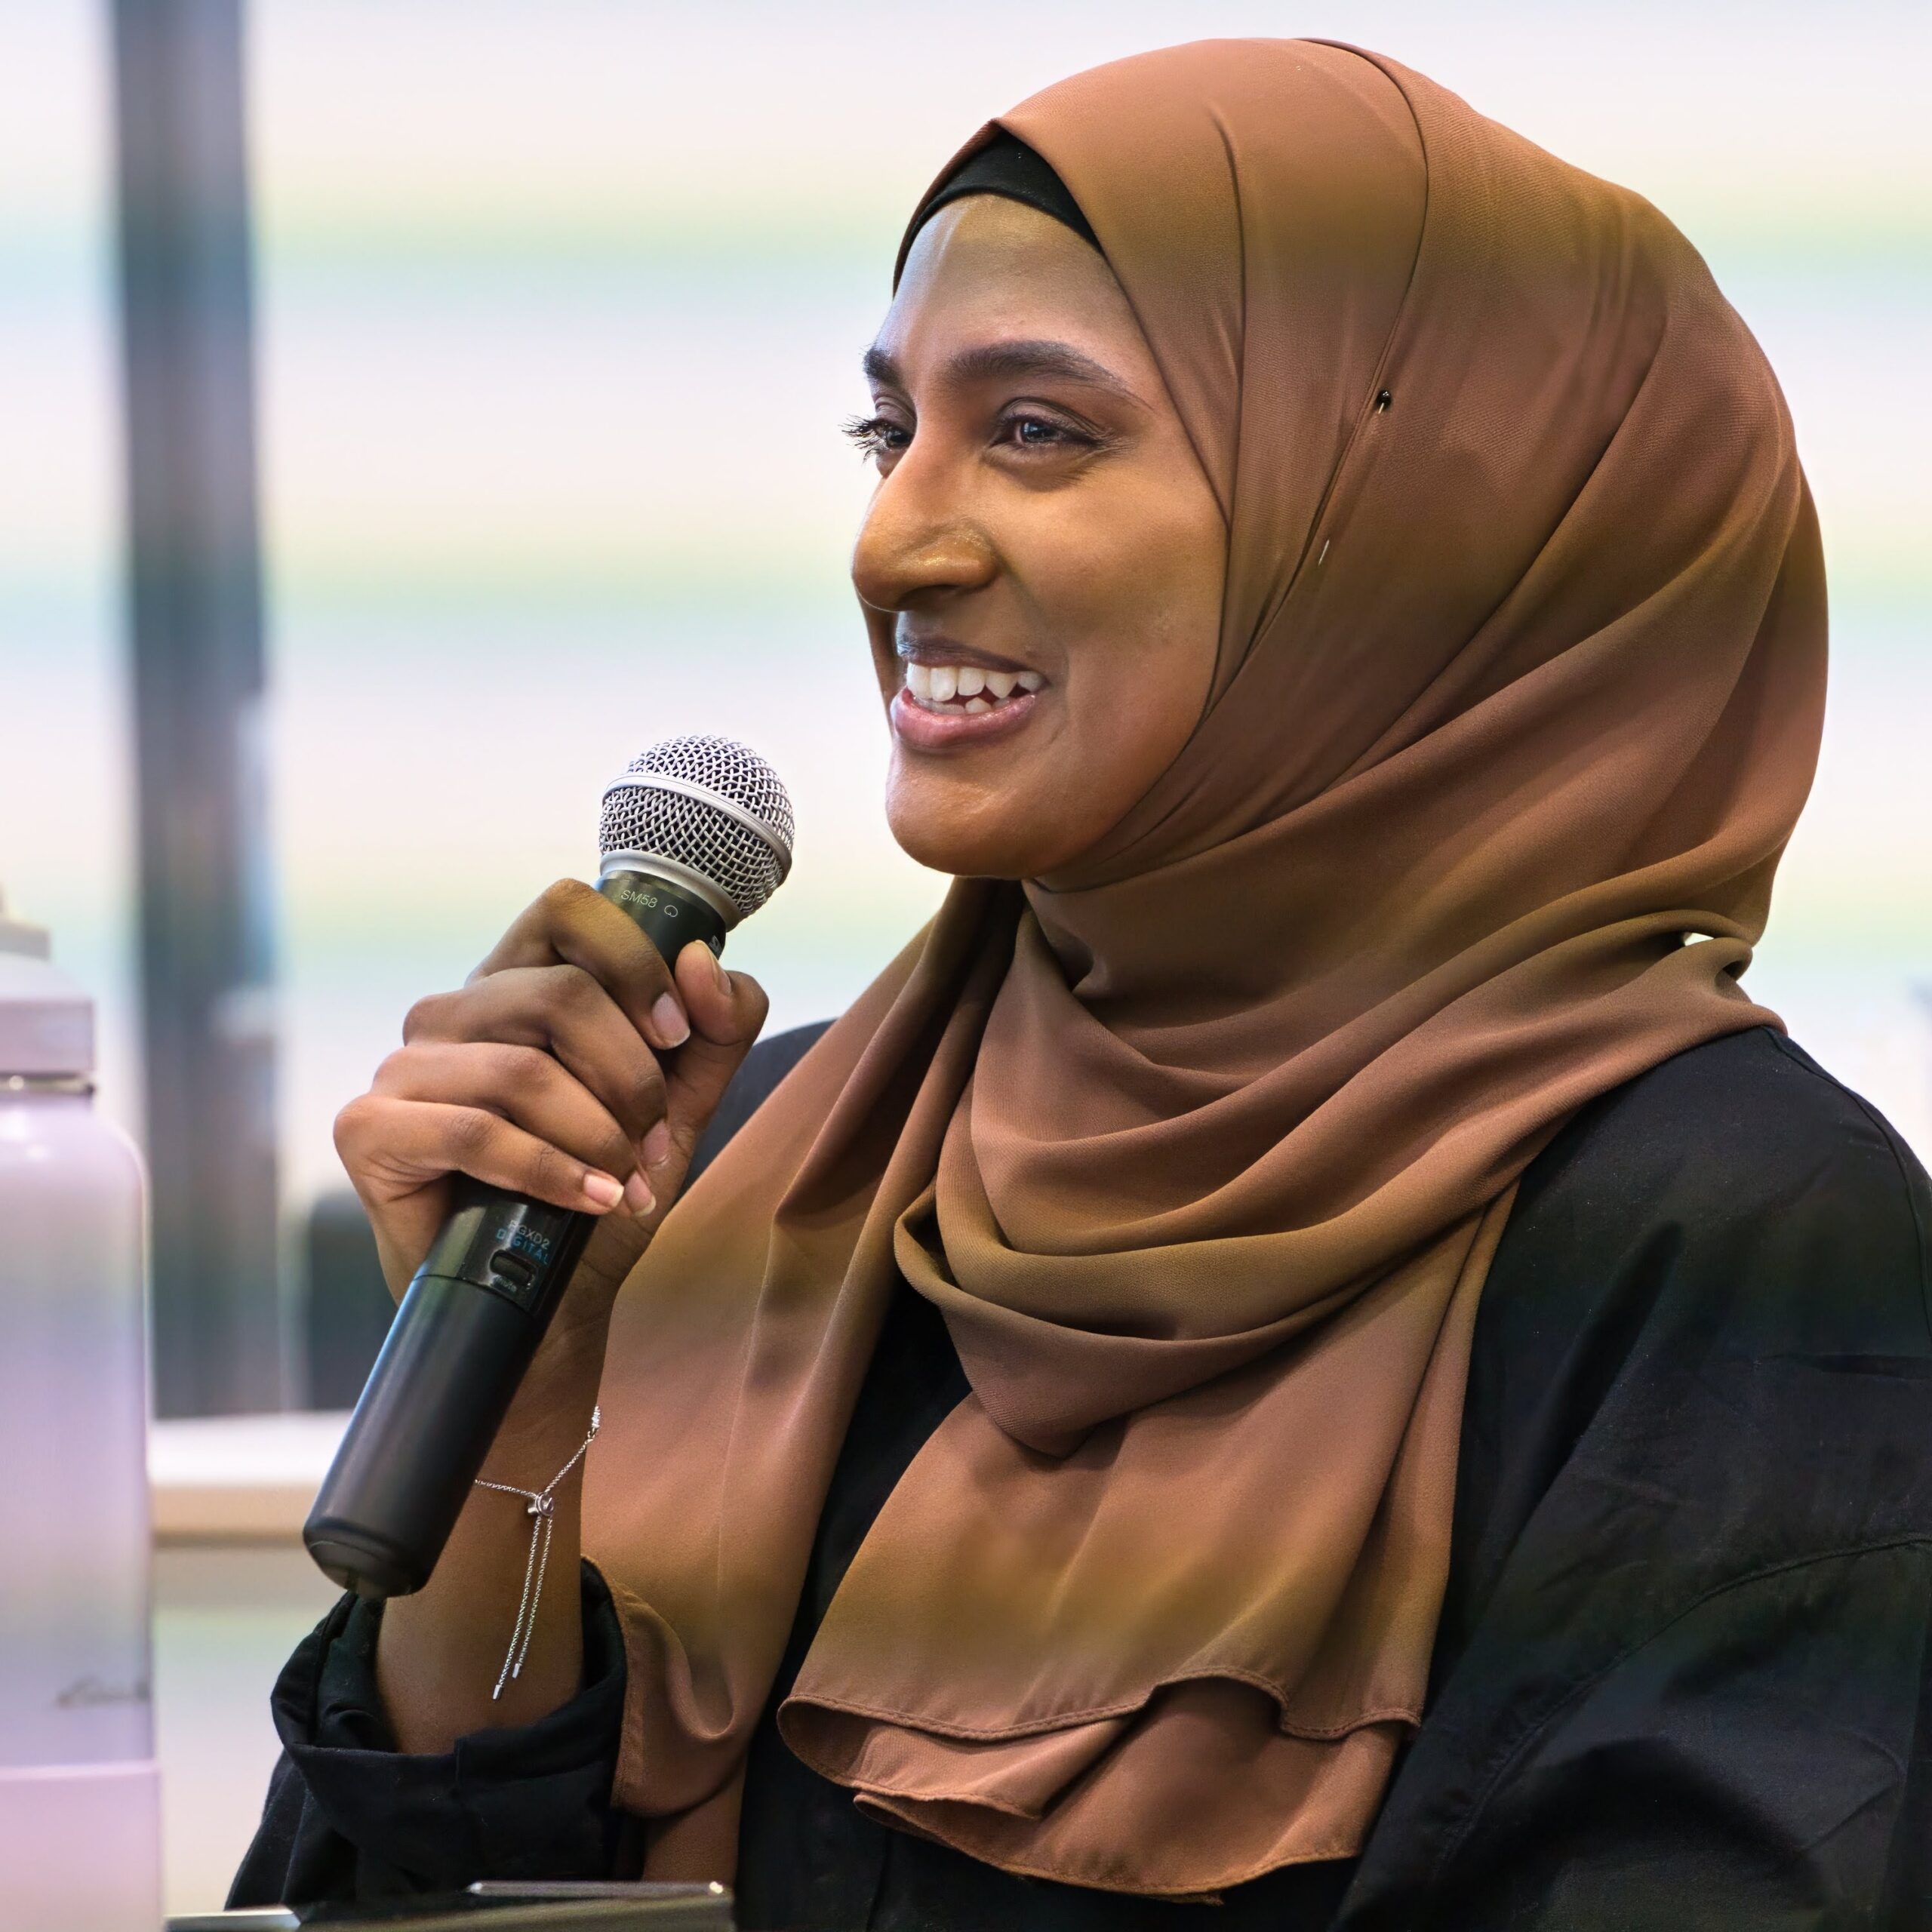 Areefah Dukhi, smiling, speaks into a microphone she is holding